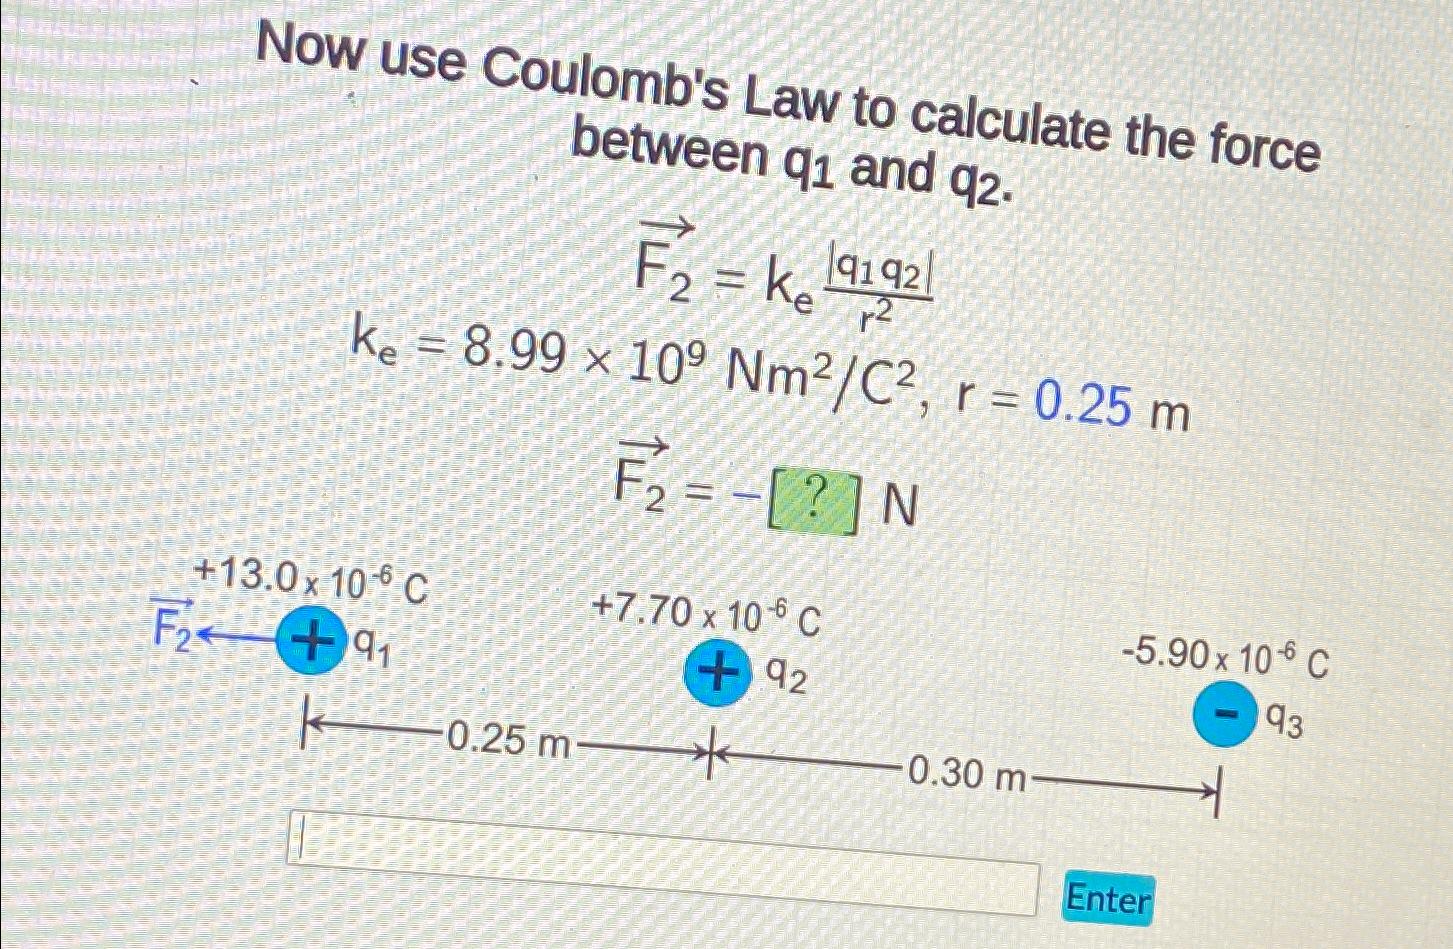 Now use Coulomb's Law to calculate the force between q1 and q2. F F = K 191921 ke r ke = 8.99 x 109 Nm/C, r =